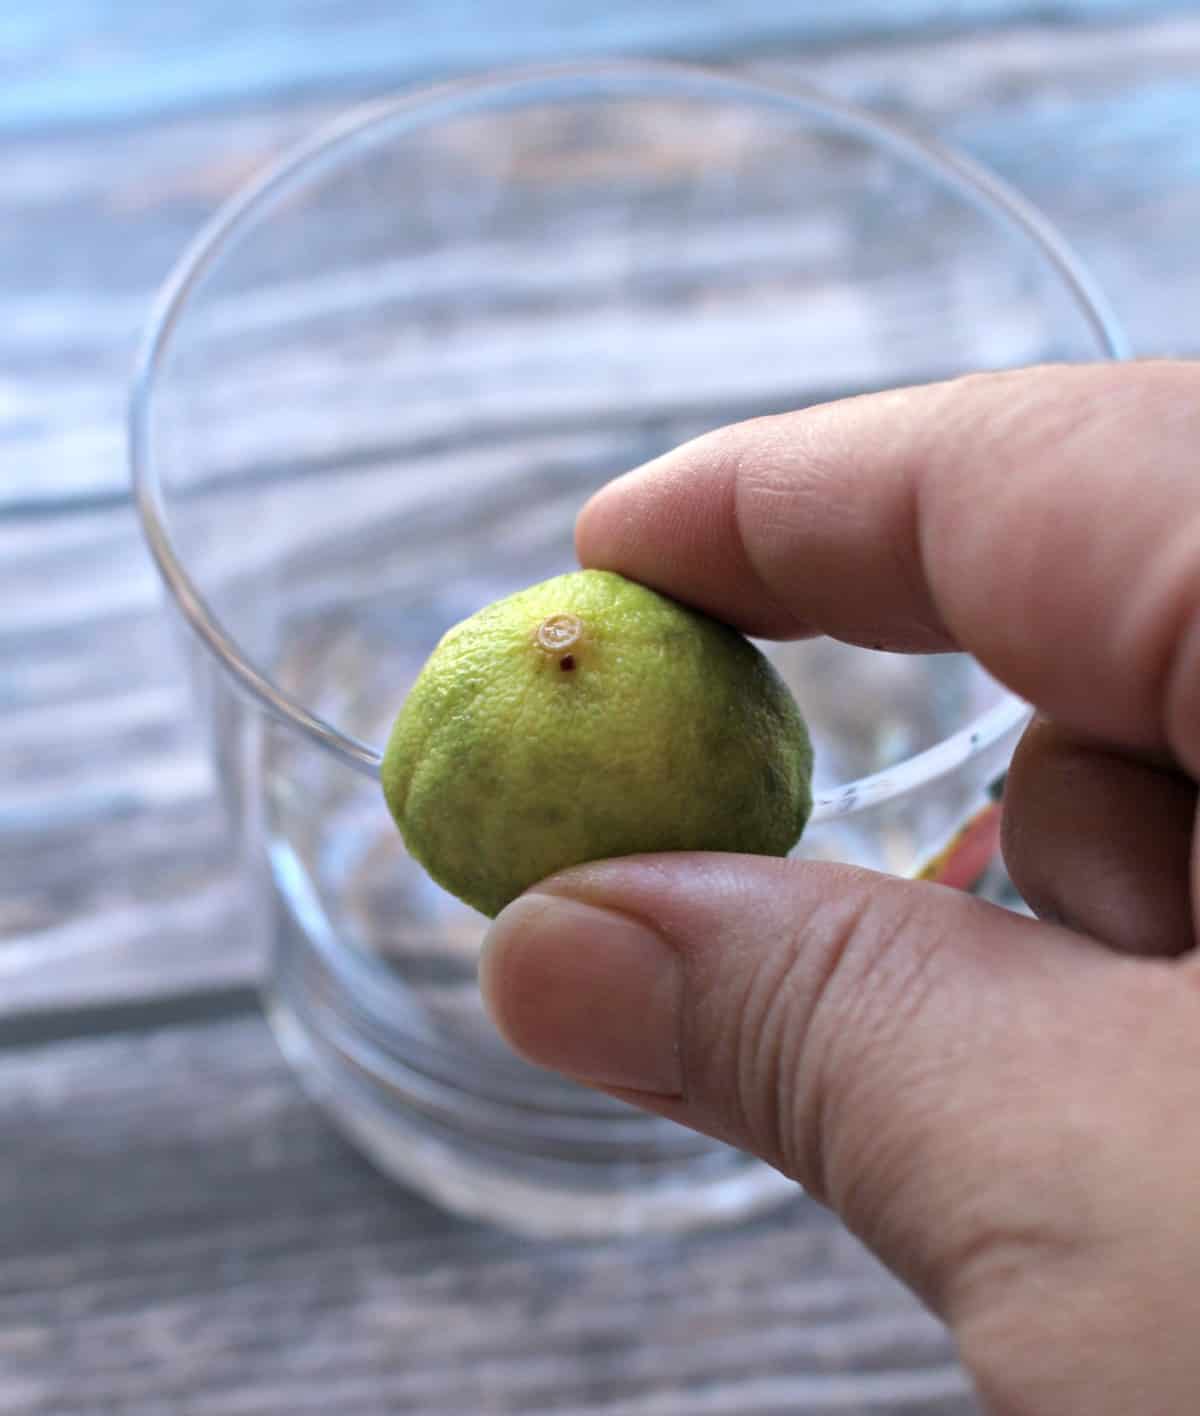 A hand rubbing lime on the rim of a glass.